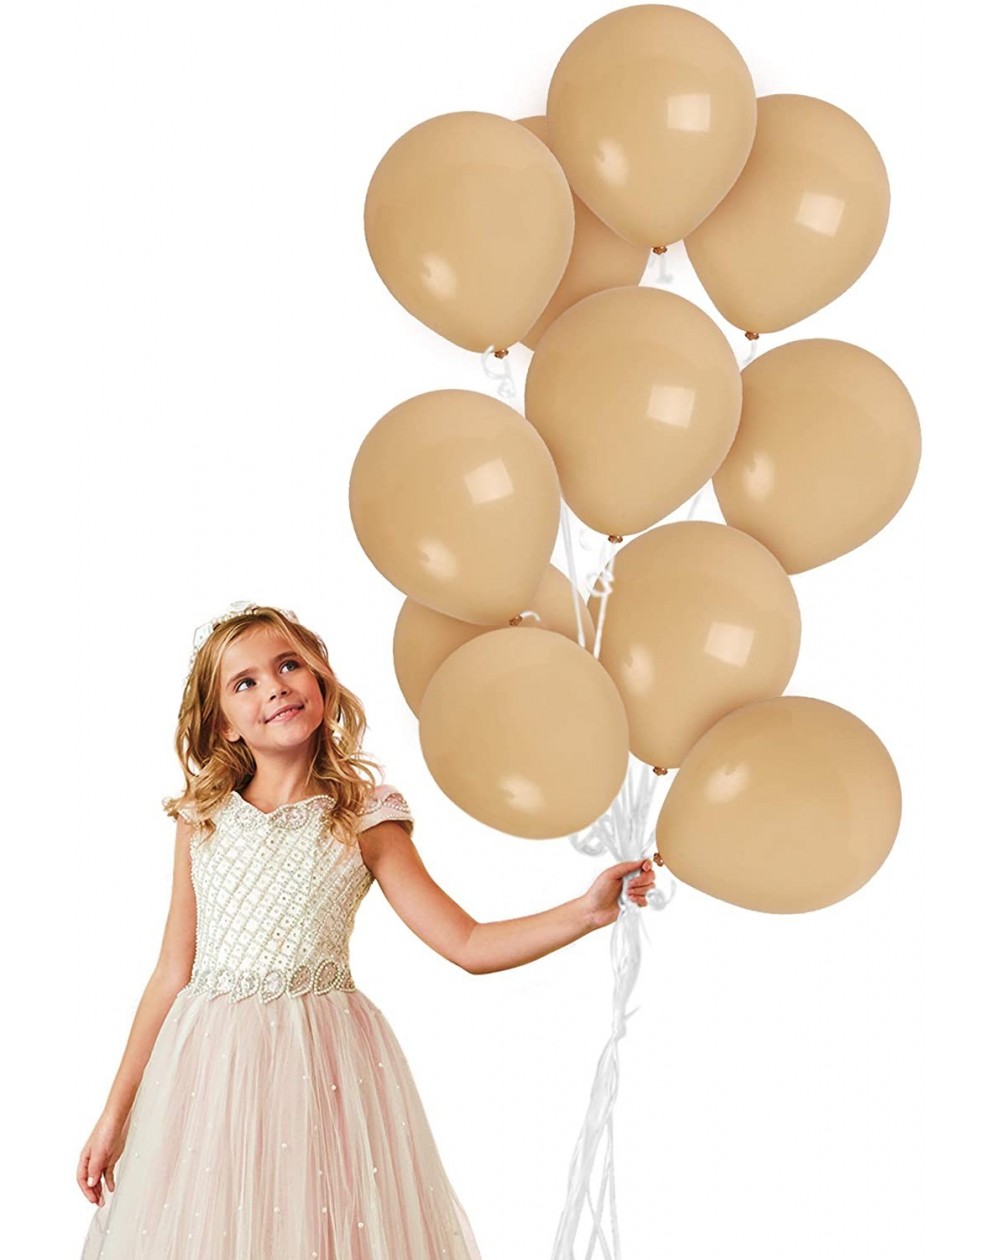 Balloons Beige Tan Balloons 10 inch 72 Pack Premium Latex Beige Balloons for Rustic Wedding Baby and Bridal Shower Birthday P...